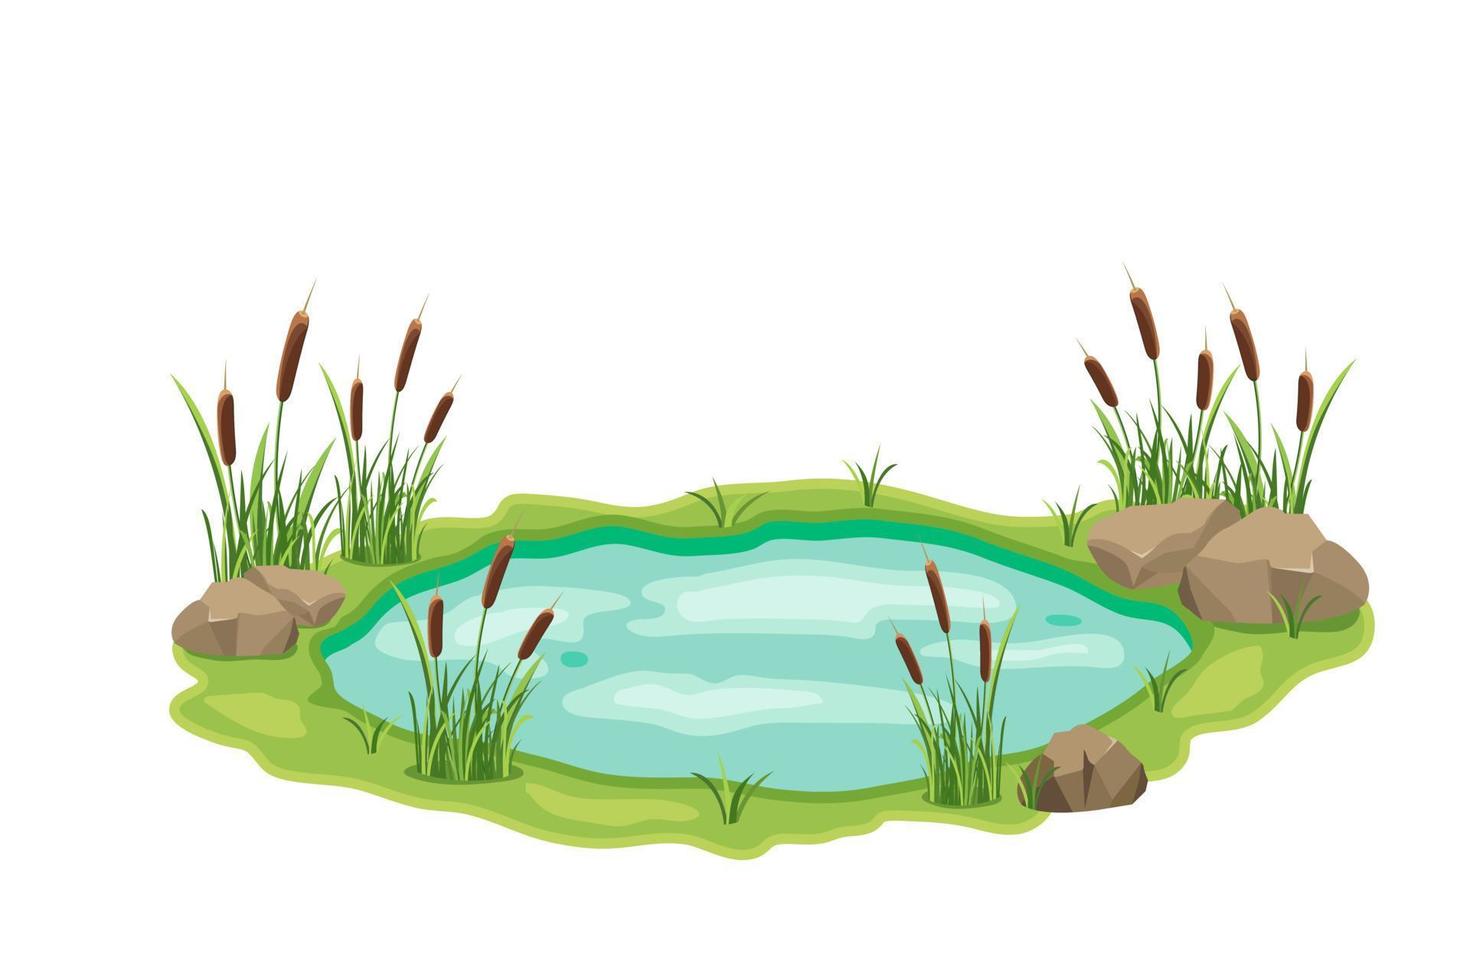 Pond with cattail and thickets. Swamp in grass and stones. Vector design illustration with wild vegetation.